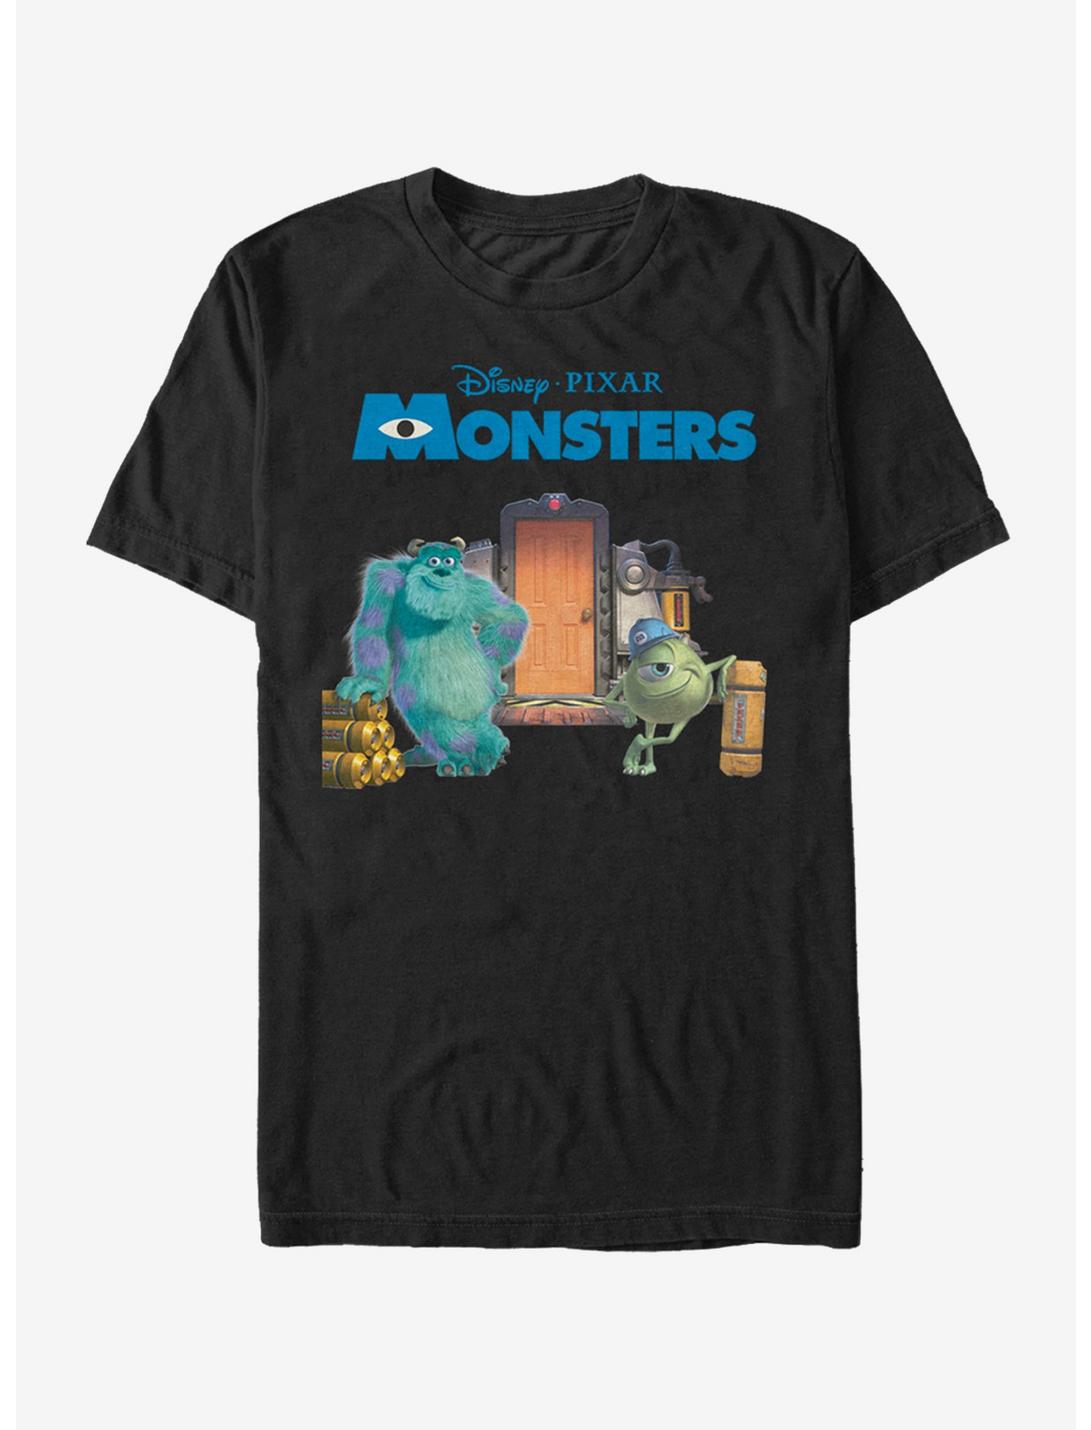 Monsters Inc. Mike and Sulley Scream Factory T-Shirt, BLACK, hi-res